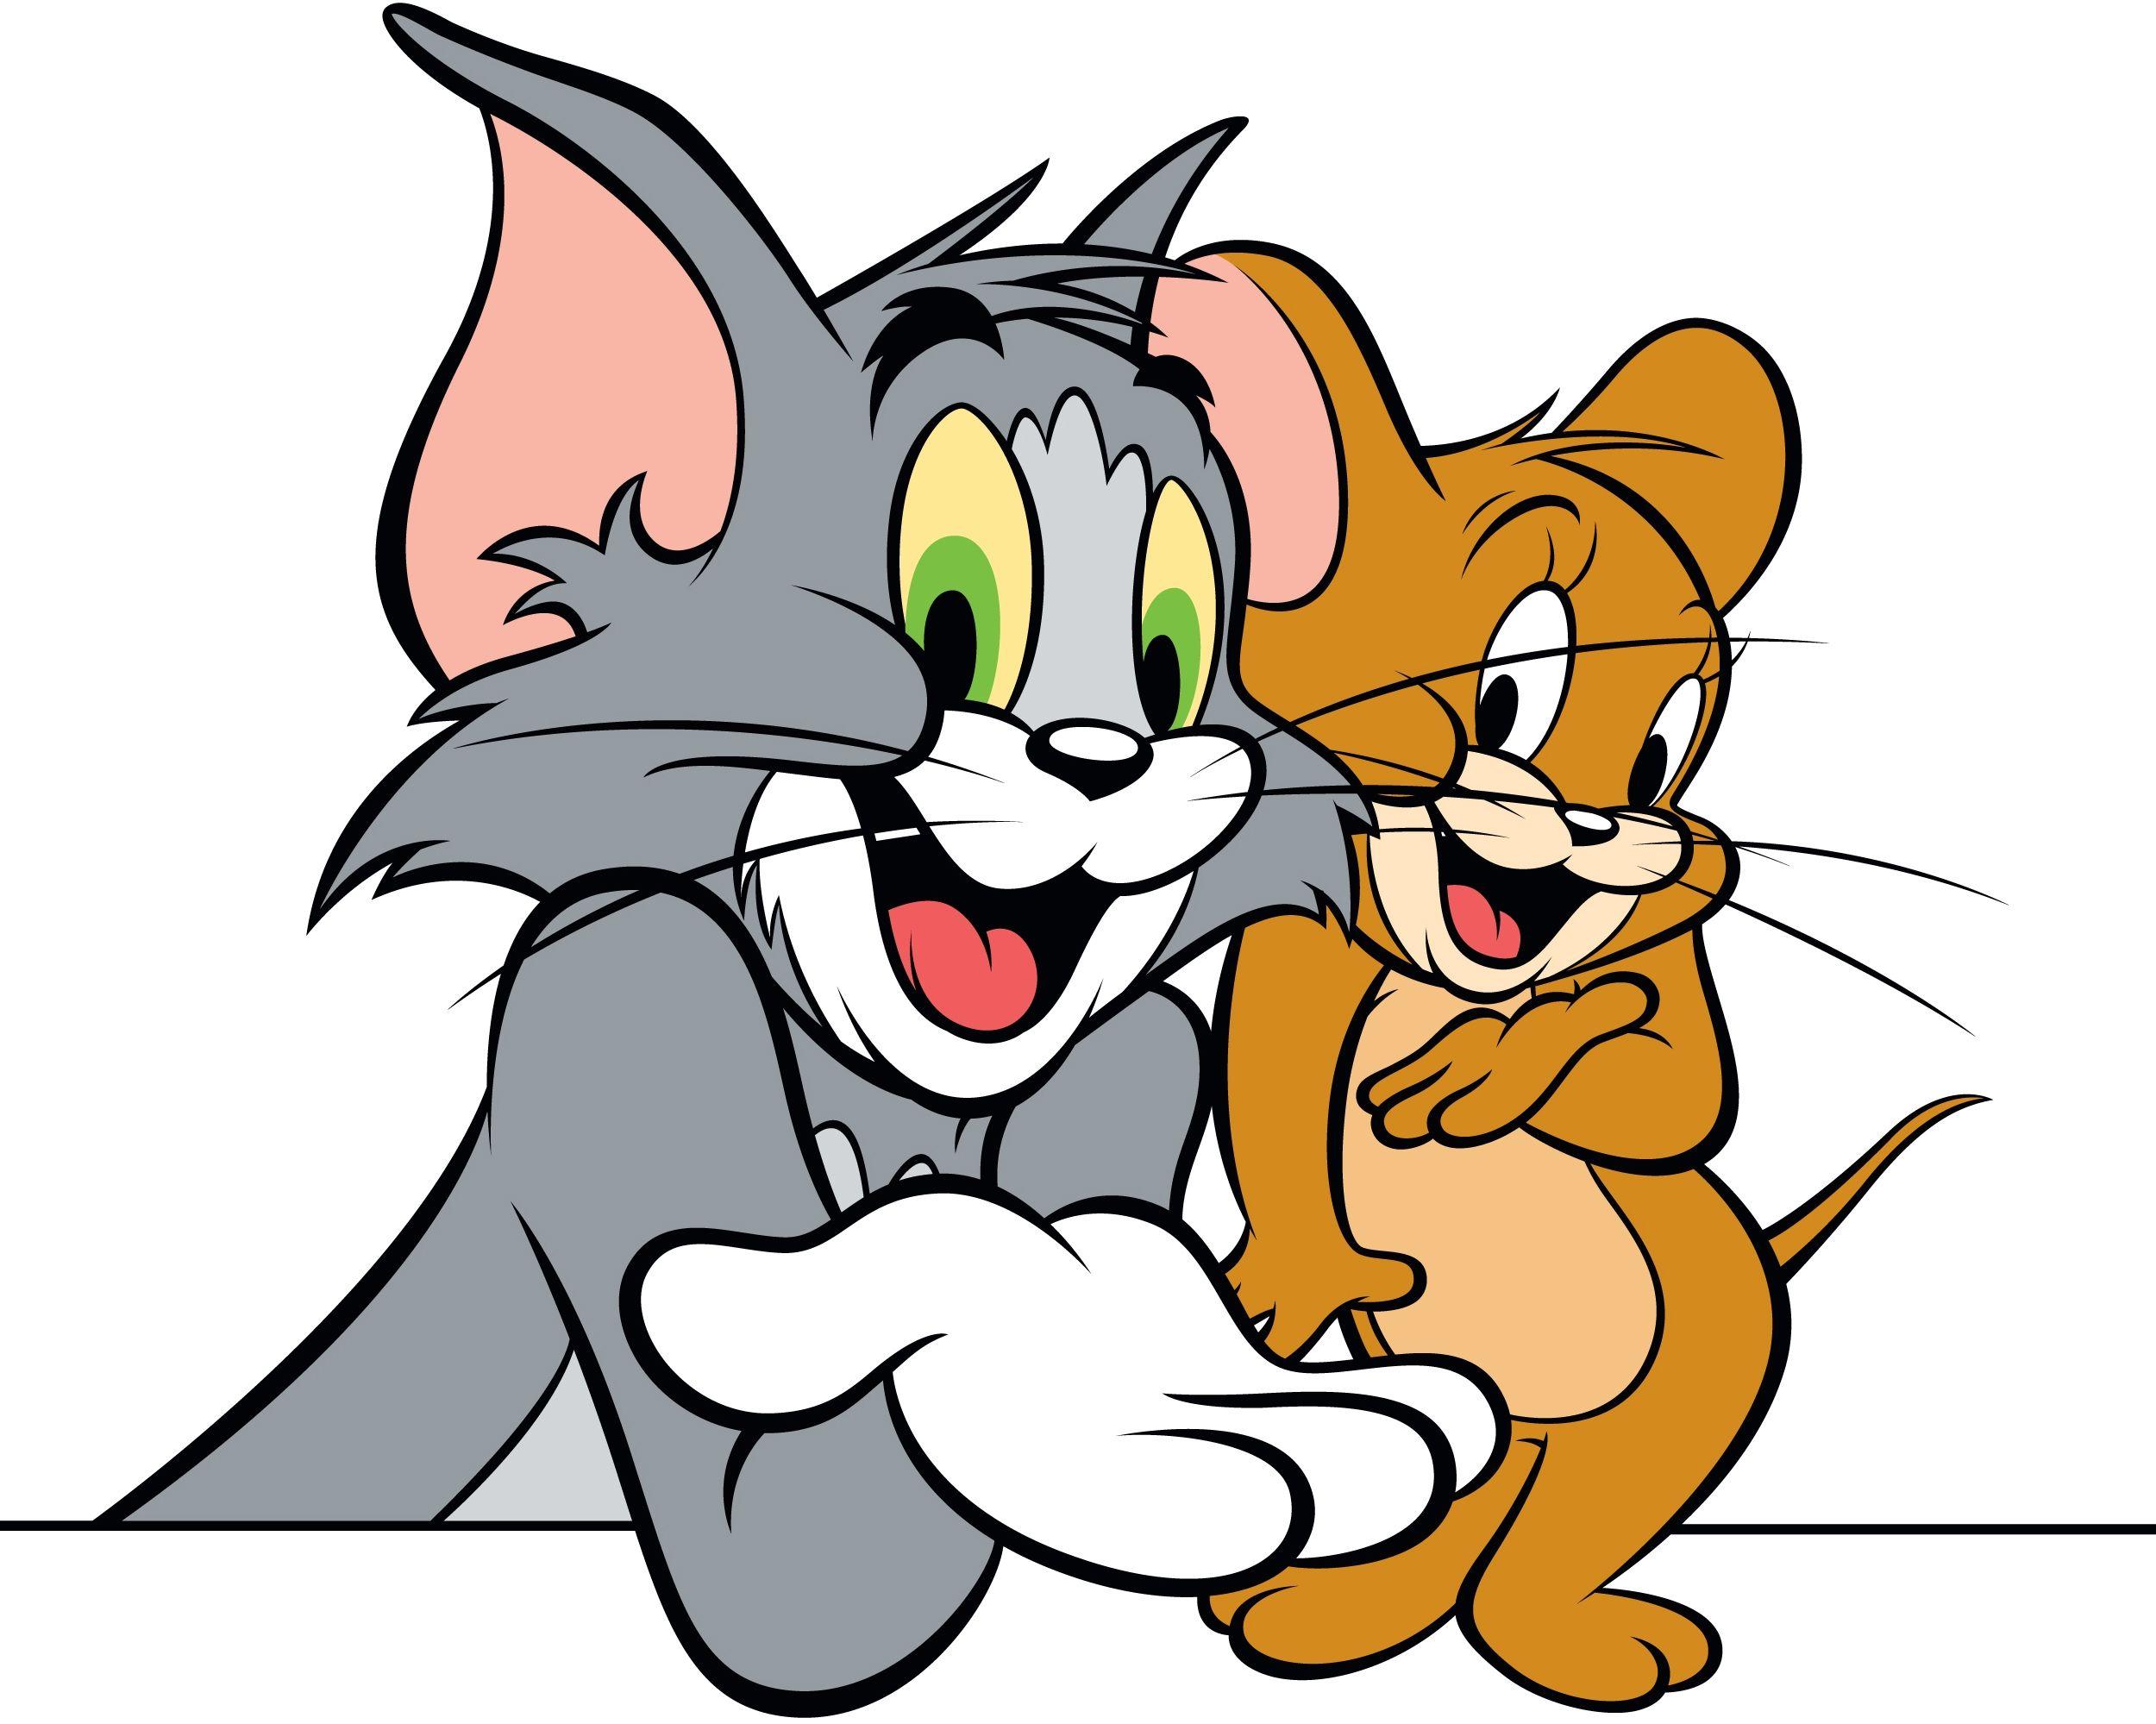 tom and jerry 3d wallpaper